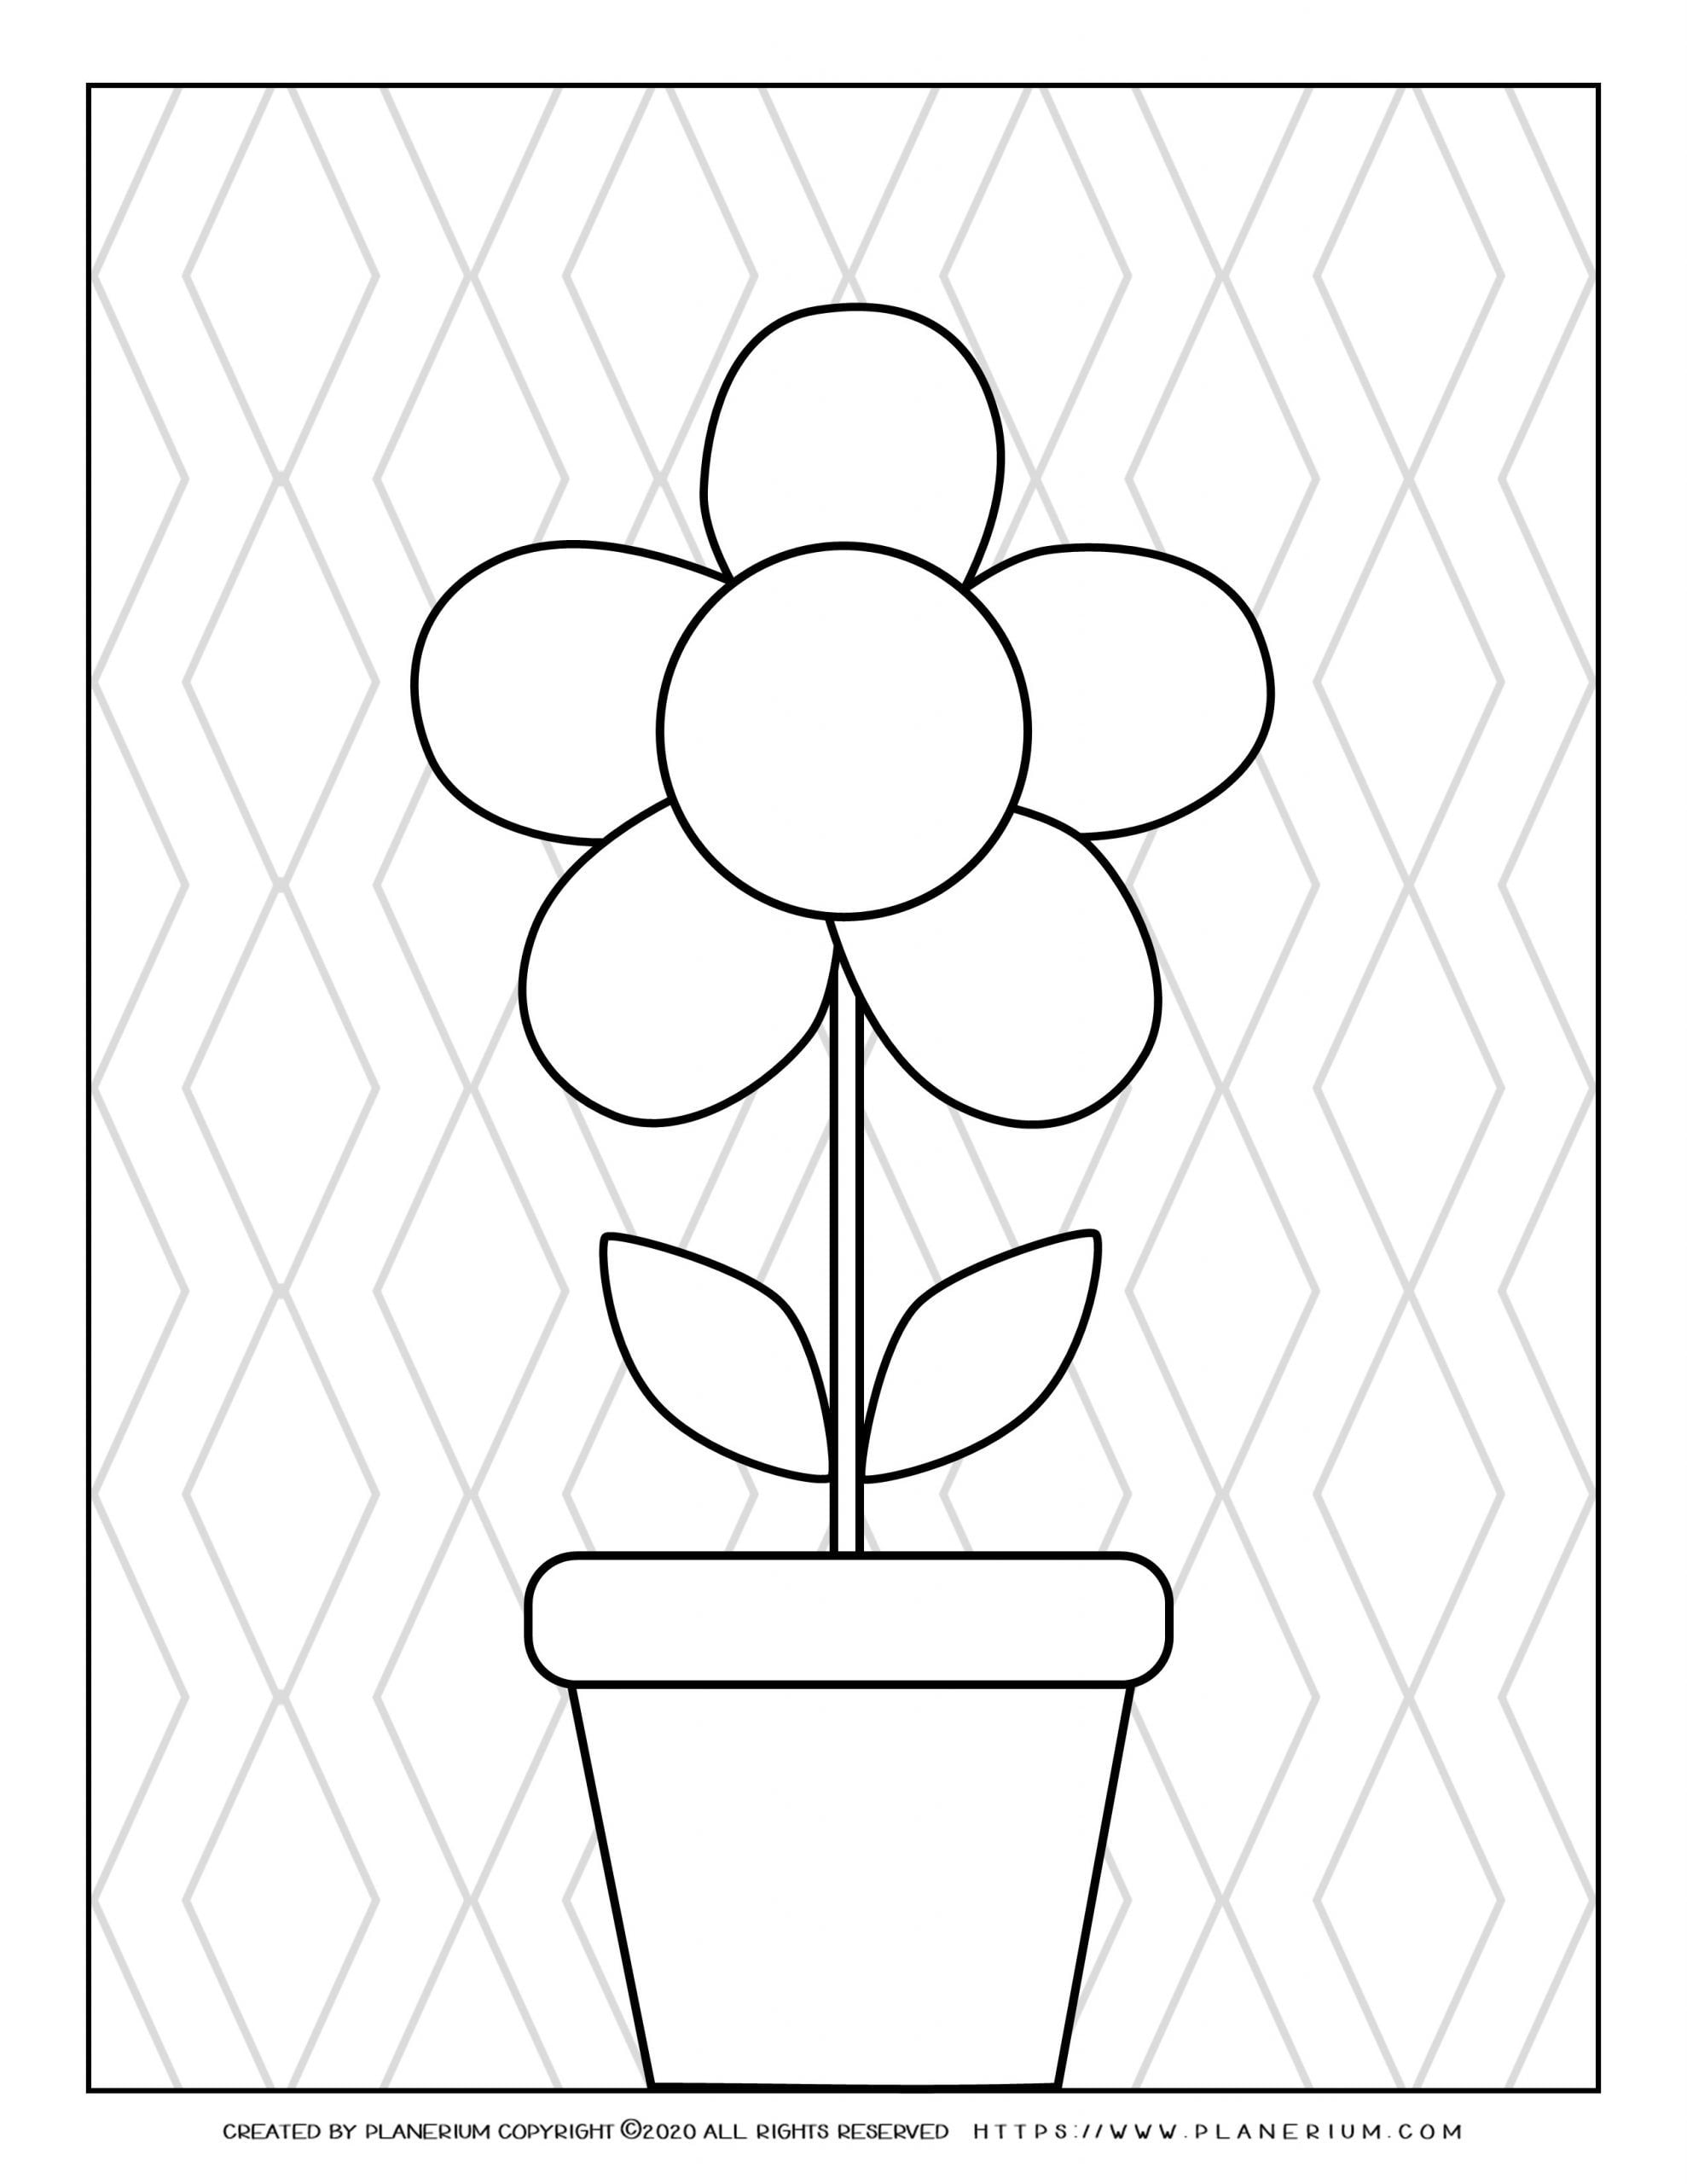 Spring - Coloring page - Flower in a Pot - Zig Zag BG | Planerium